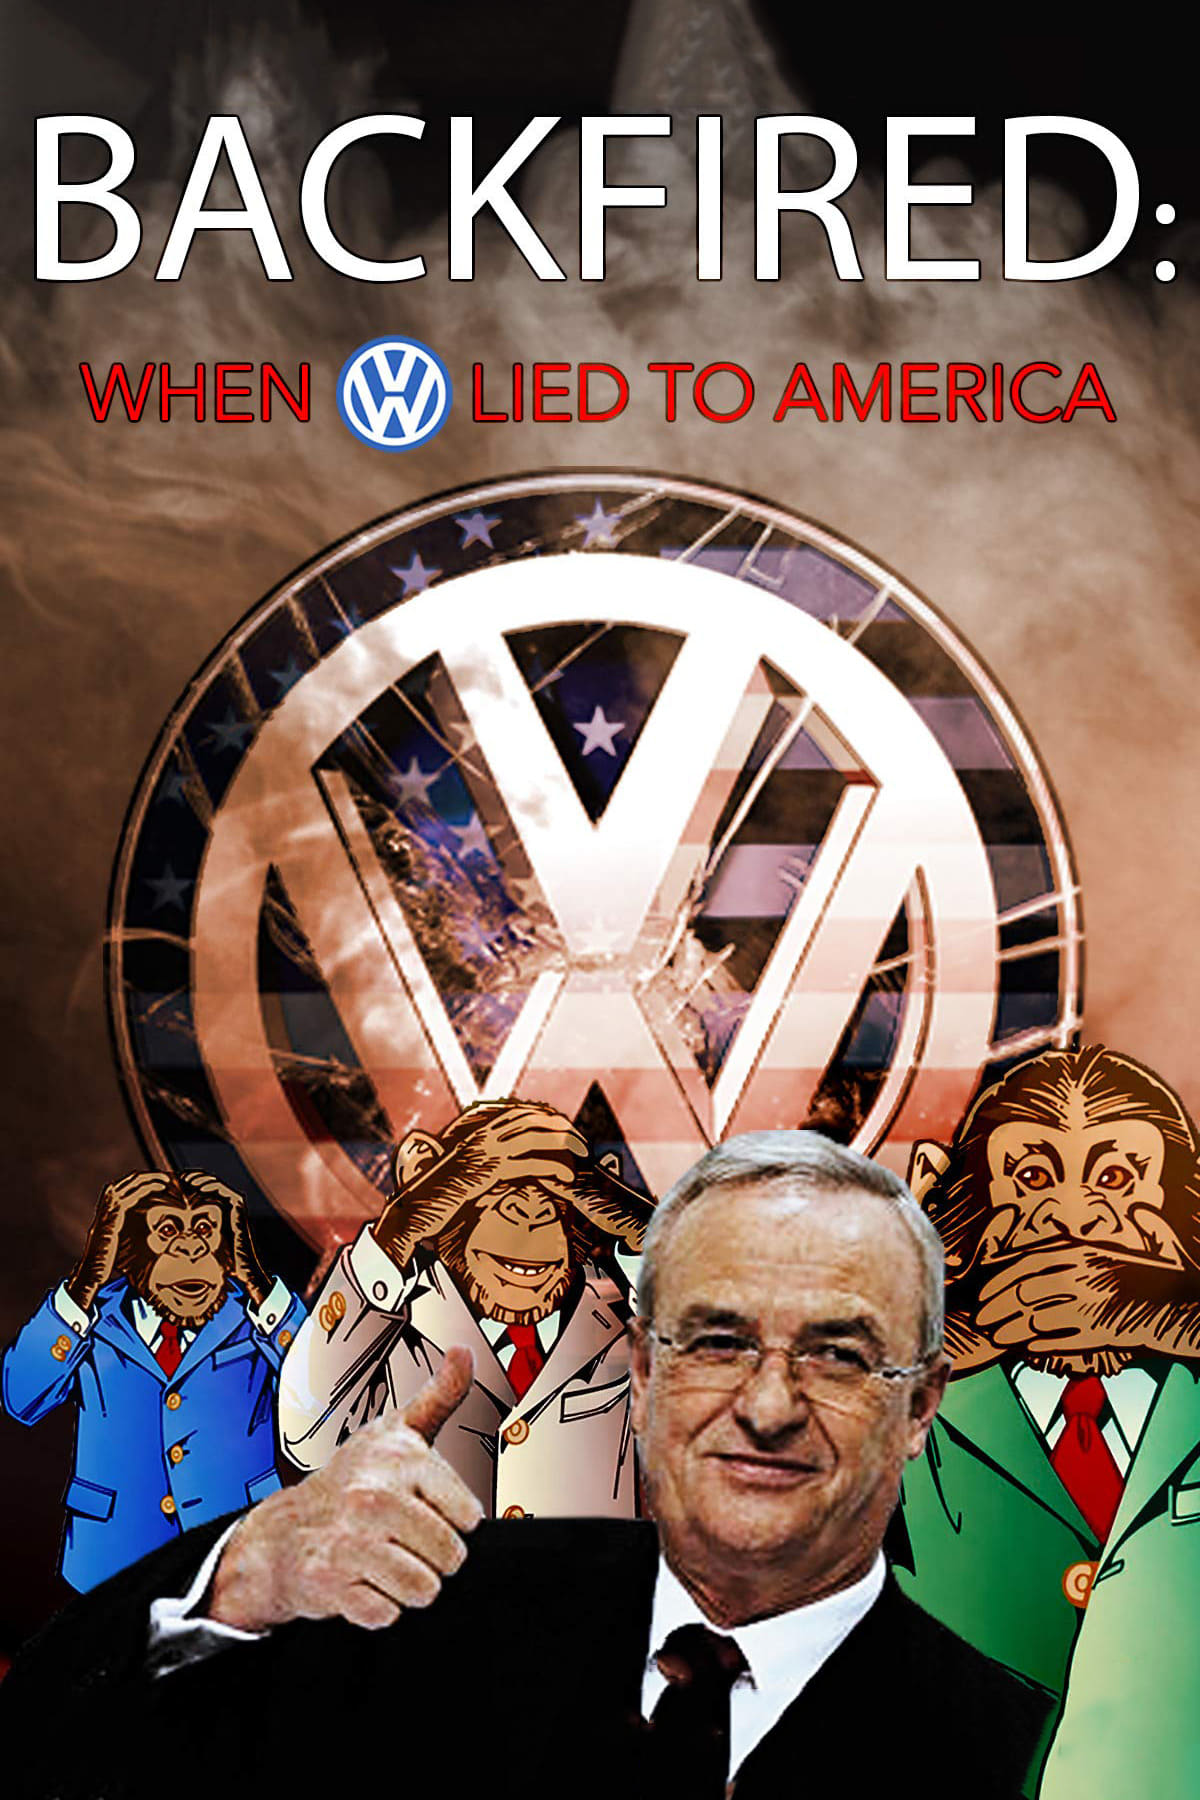 Backfired: When VW lied to America on FREECABLE TV